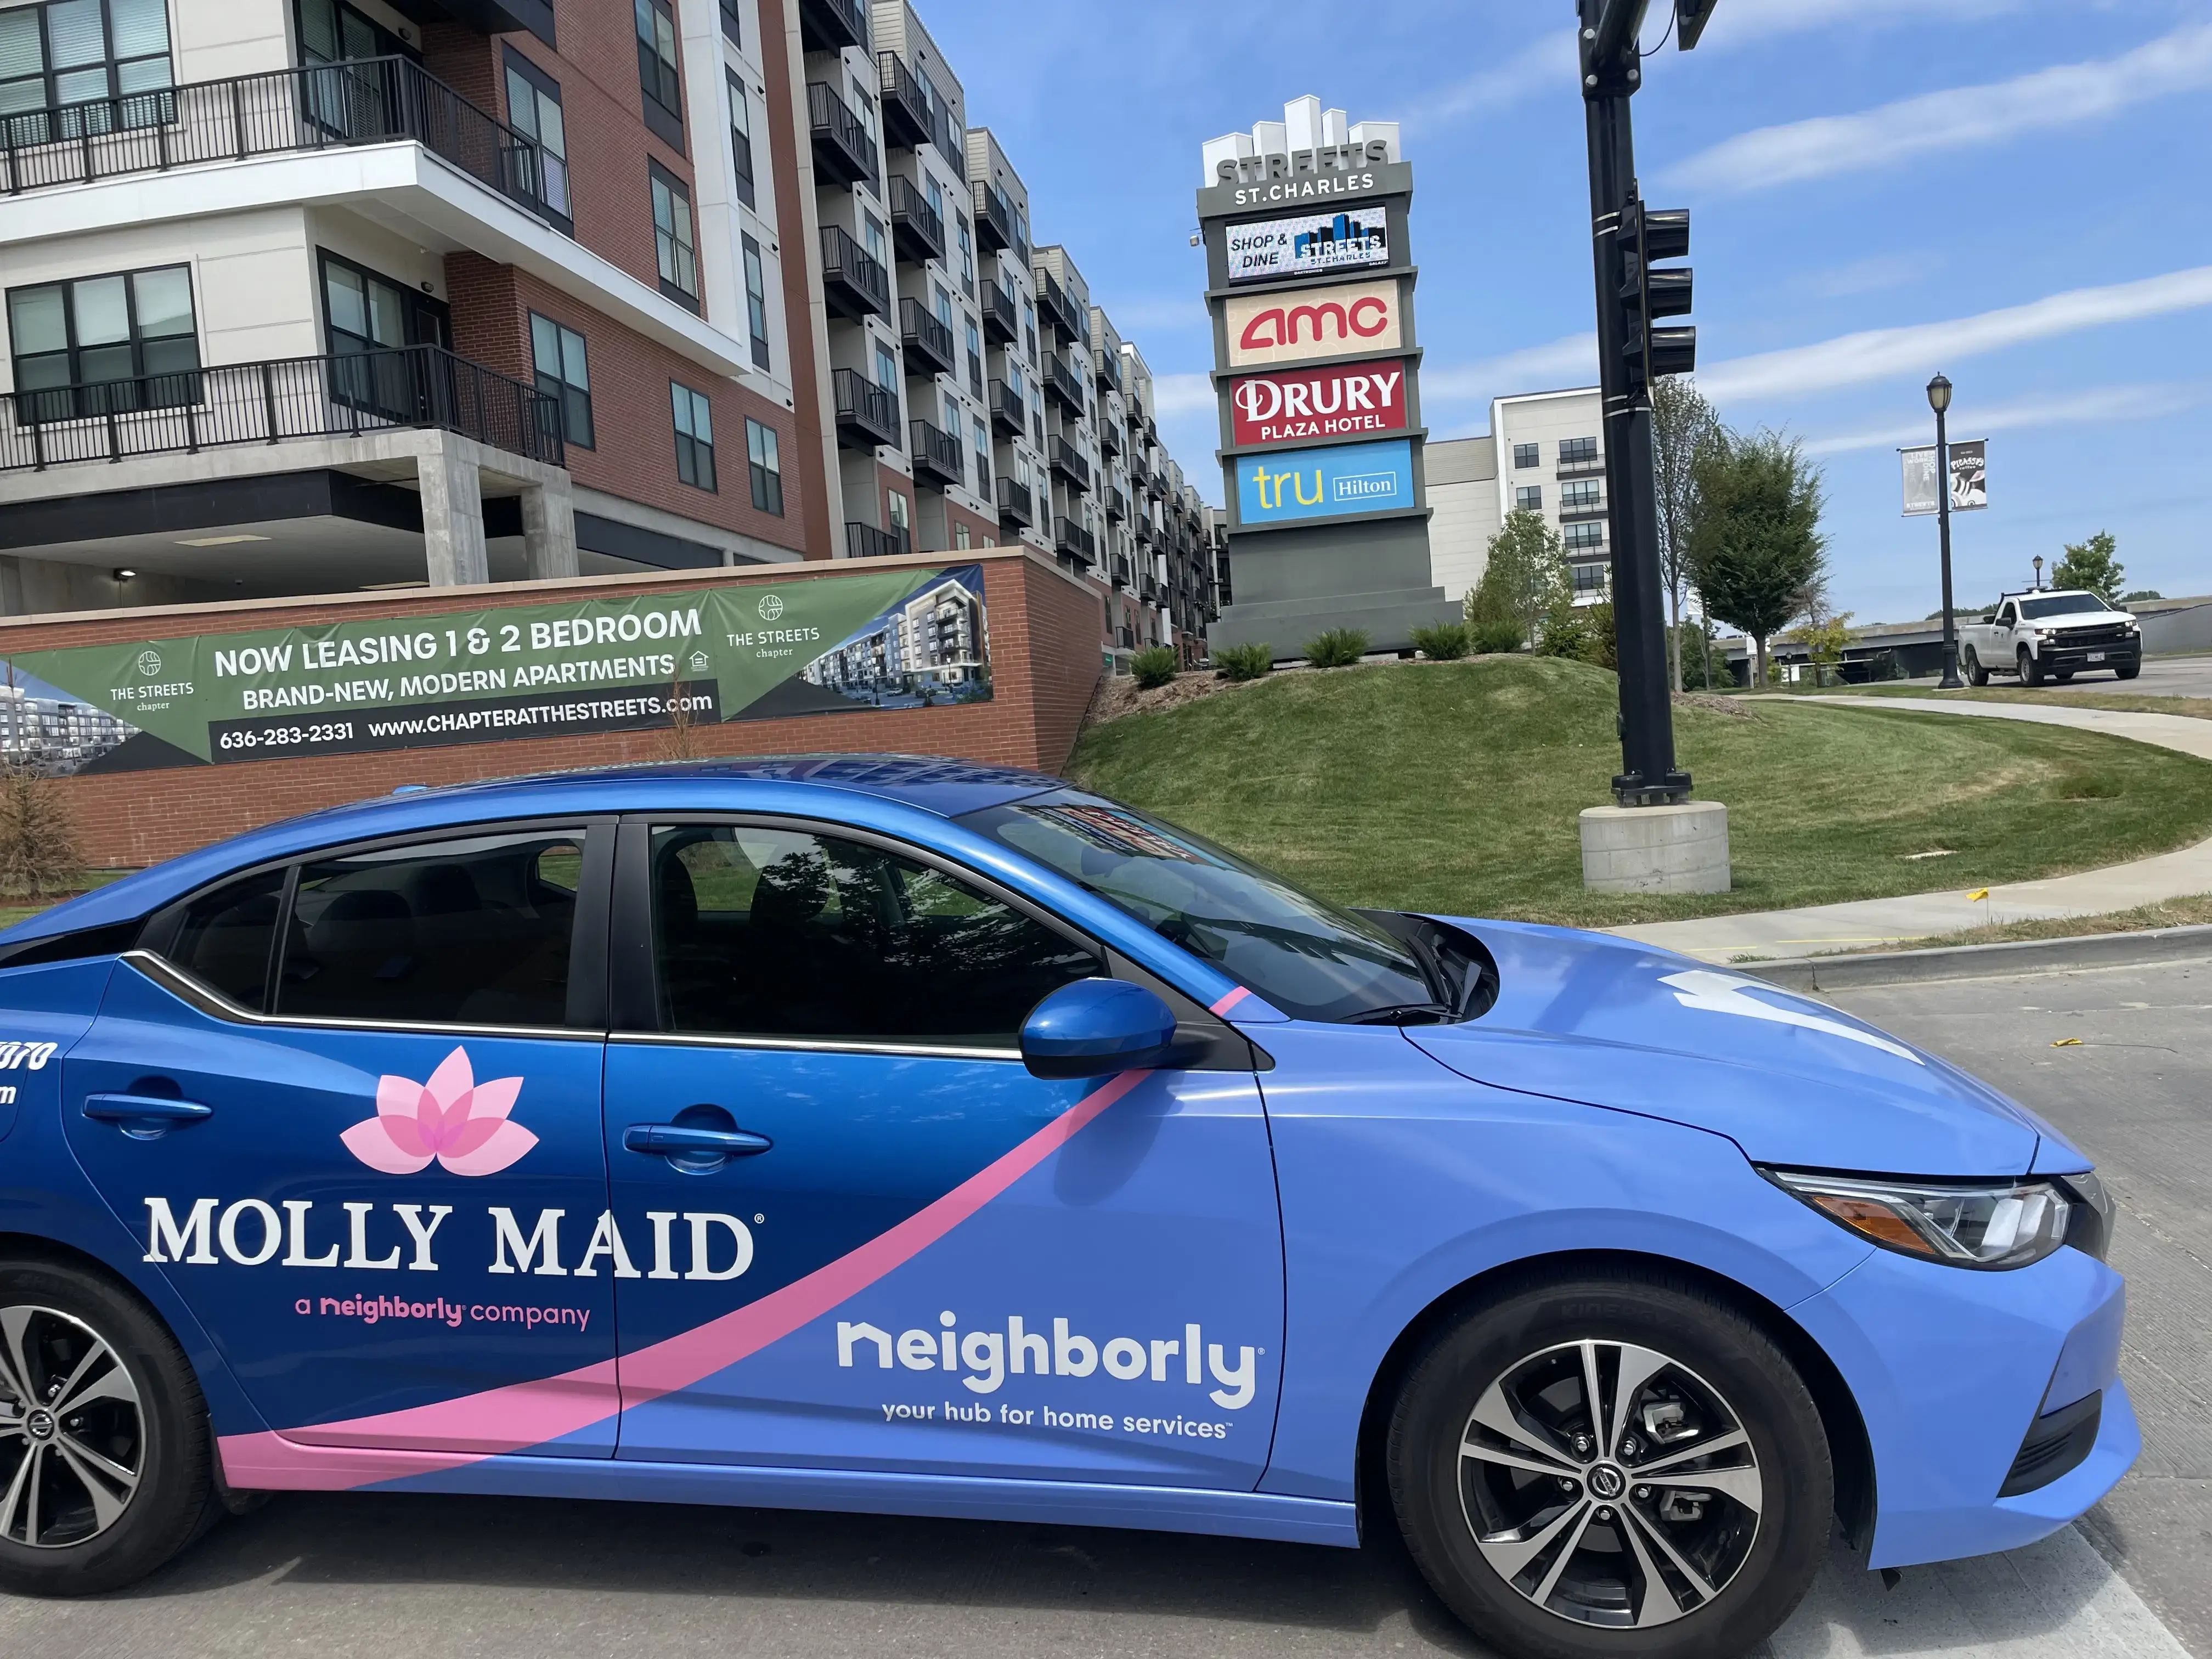 Molly Maid company car parked during an apartment cleaning appointment in St. Charles, MO